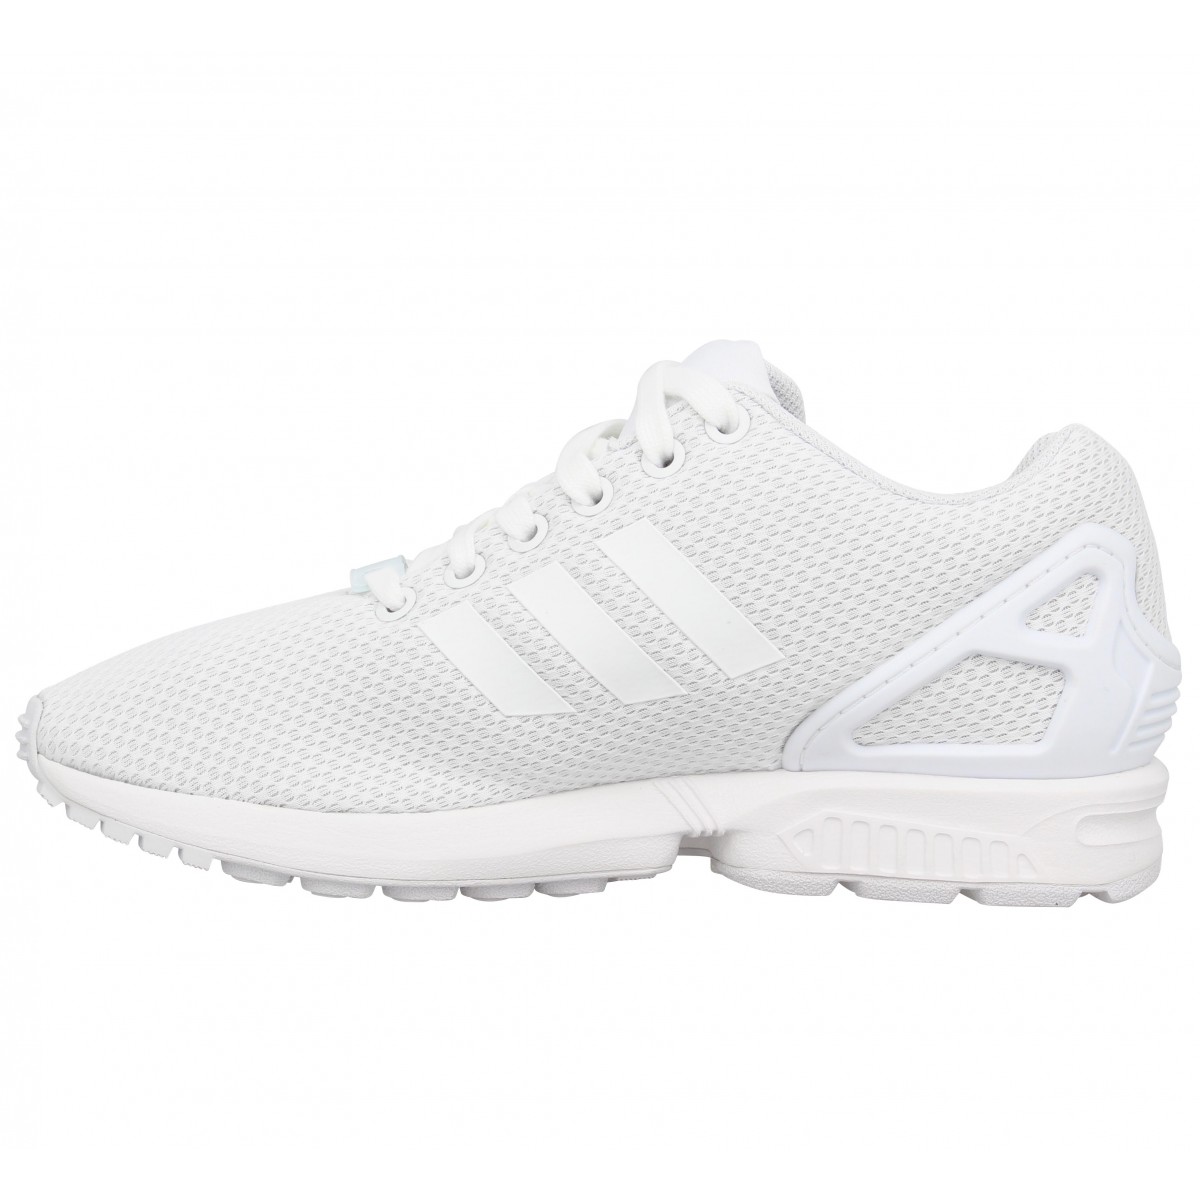 Adidas zx flux toile homme blanc | Fanny chaussures